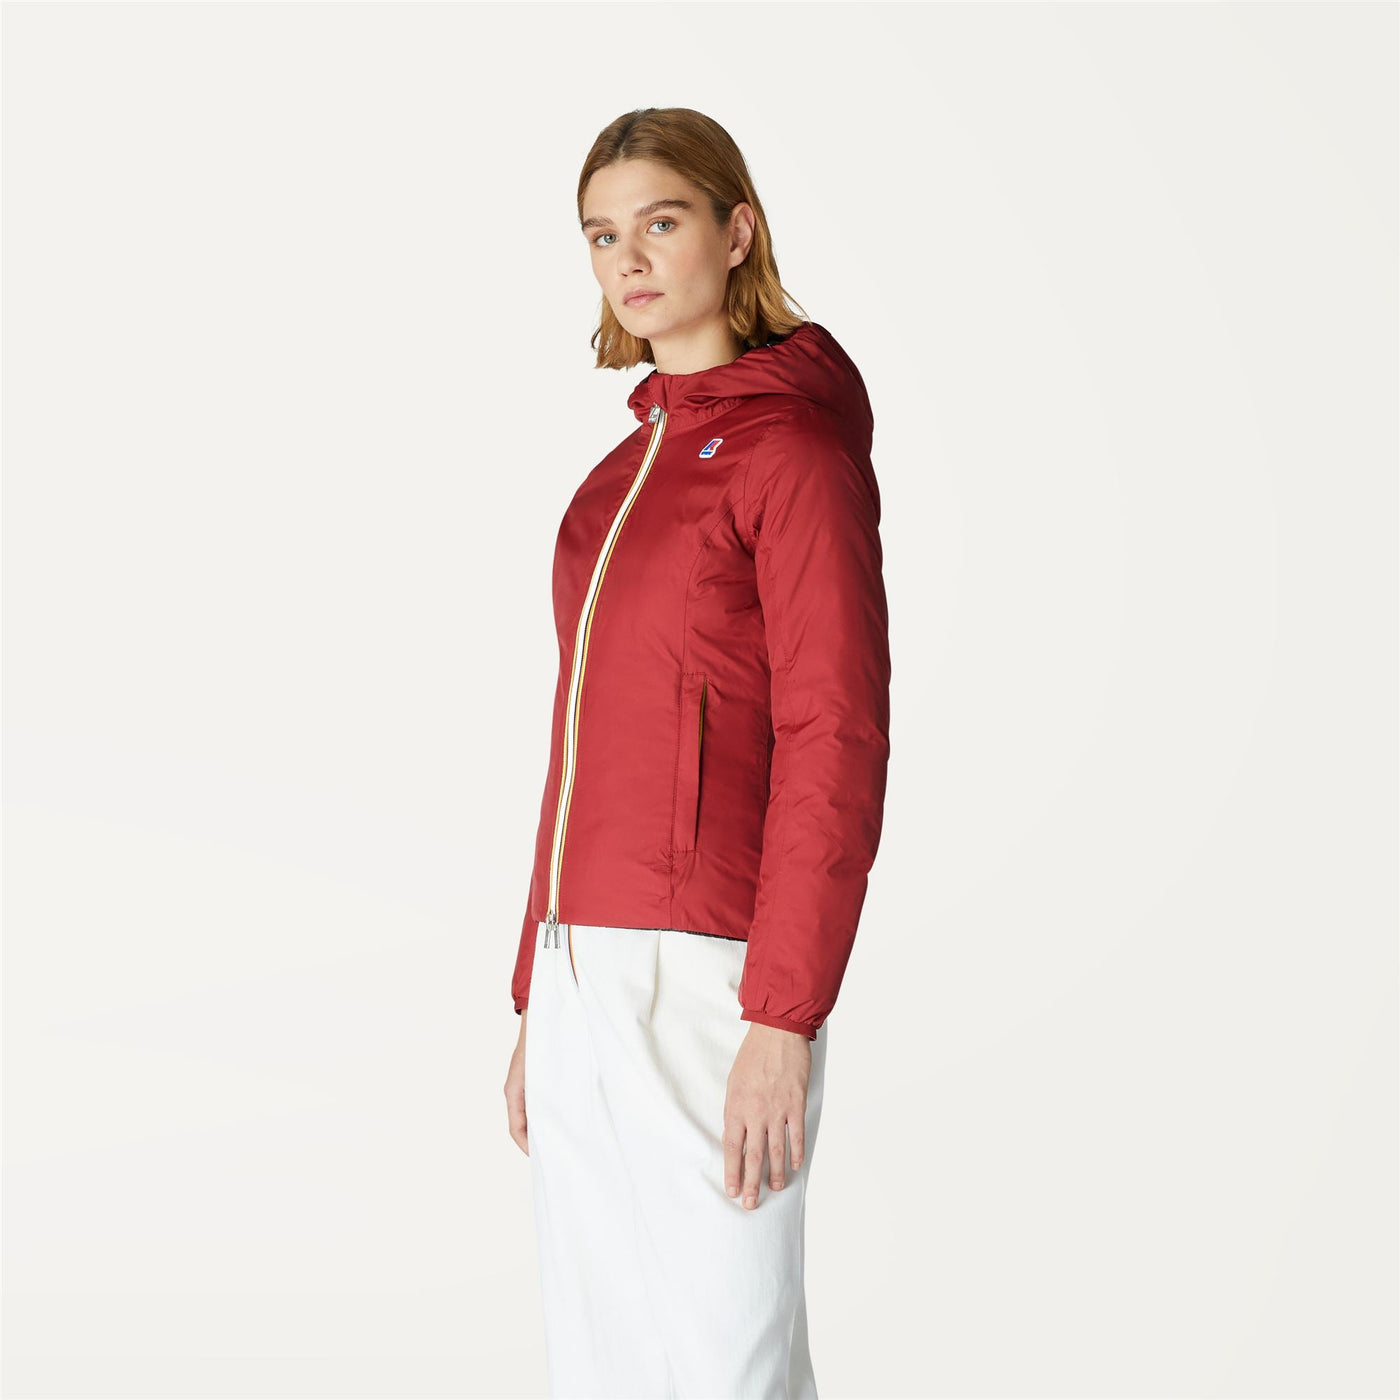 Jackets Woman LILY THERMO PLUS.2 REVERSIBLE Short Red Dk - Black Pure | K-Way Detail (jpg Rgb)			